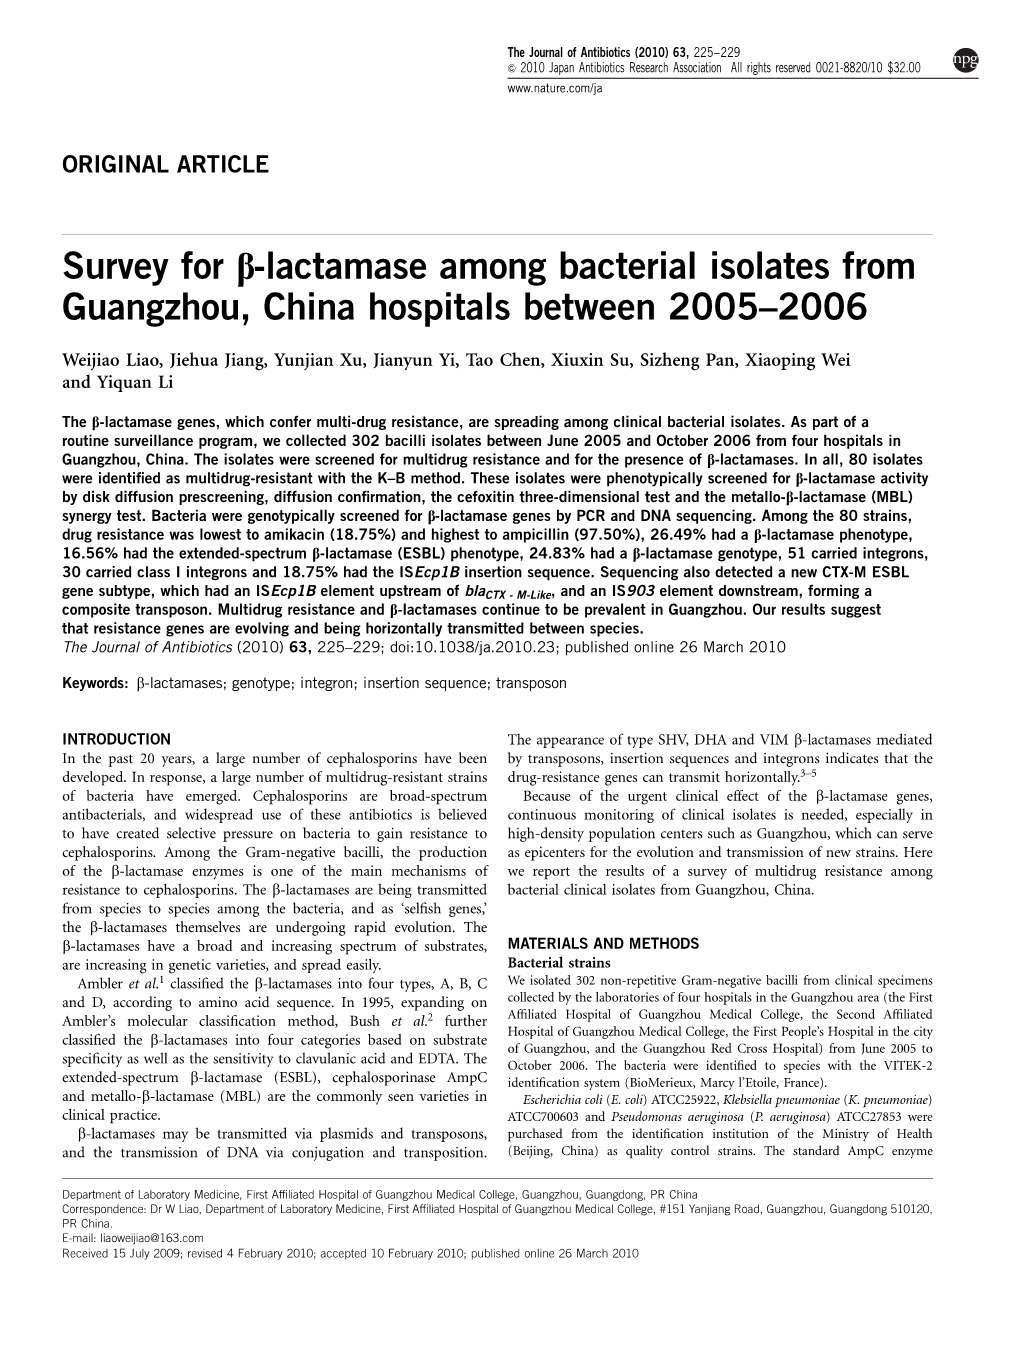 Survey for Β-Lactamase Among Bacterial Isolates from Guangzhou